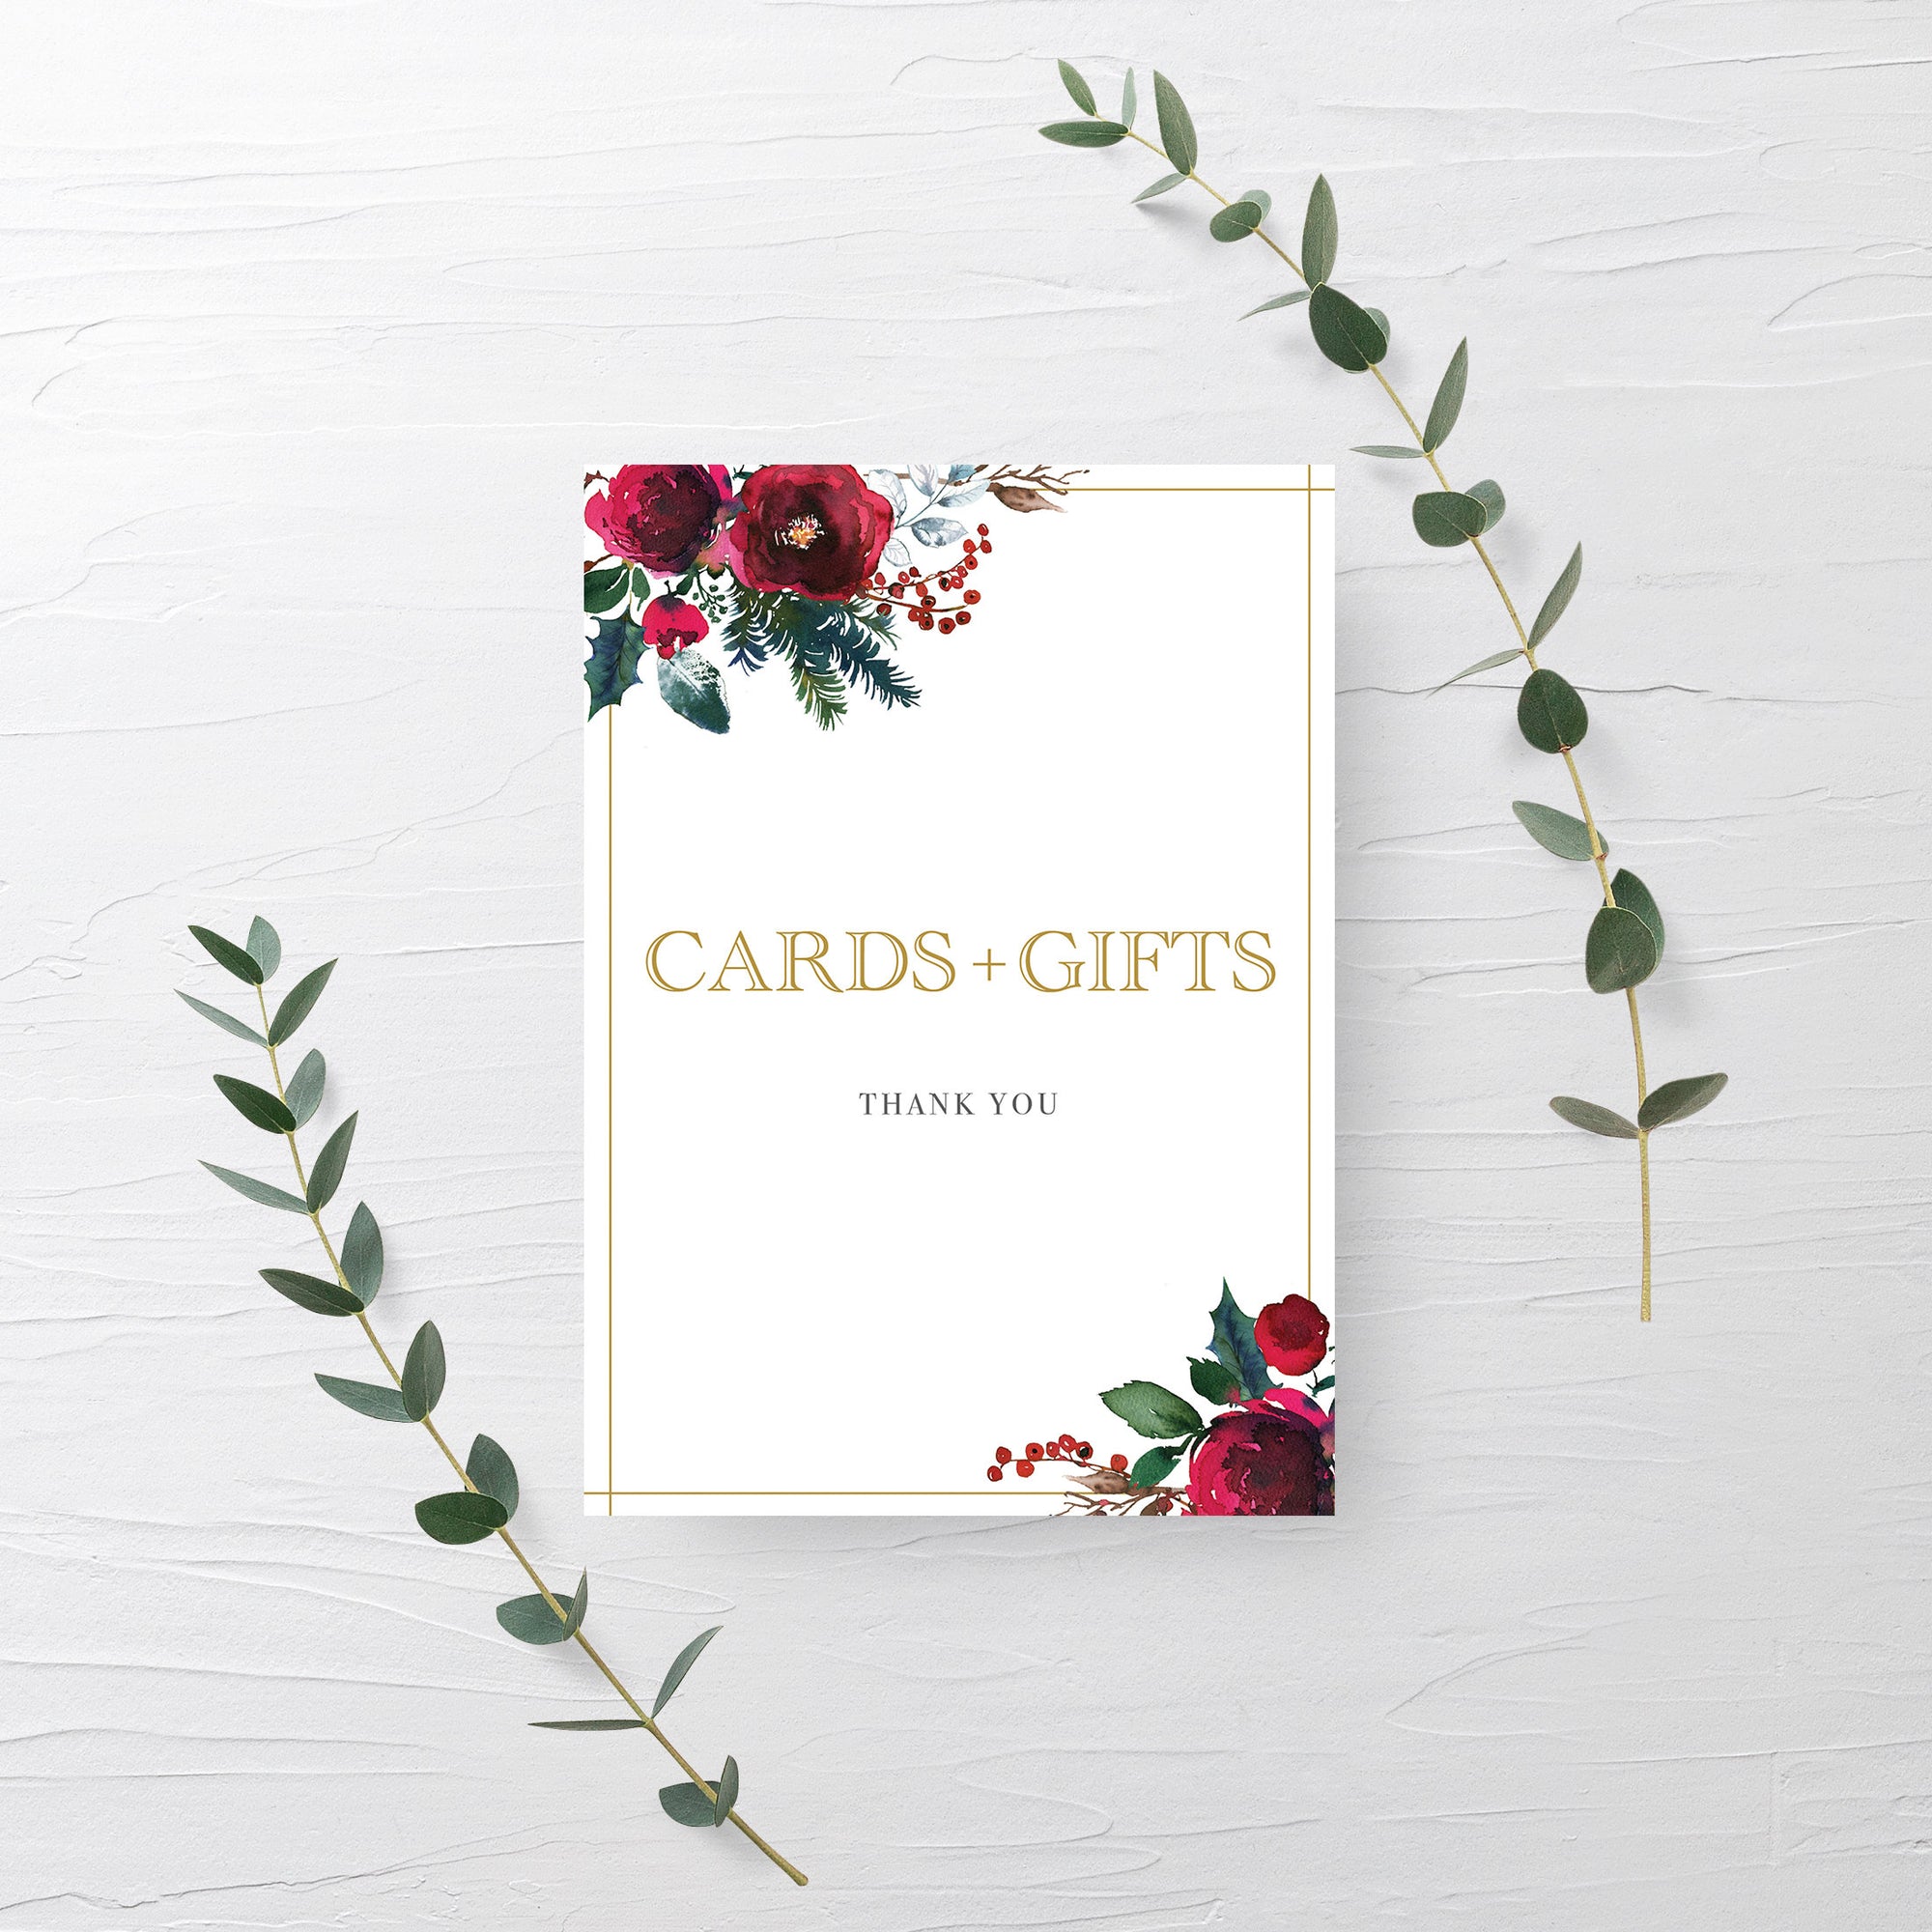 Christmas Wedding Cards and Gifts Sign Printable, Christmas Bridal Shower Cards and Gifts Printable Decorations, INSTANT DOWNLOAD - CG100 - @PlumPolkaDot 